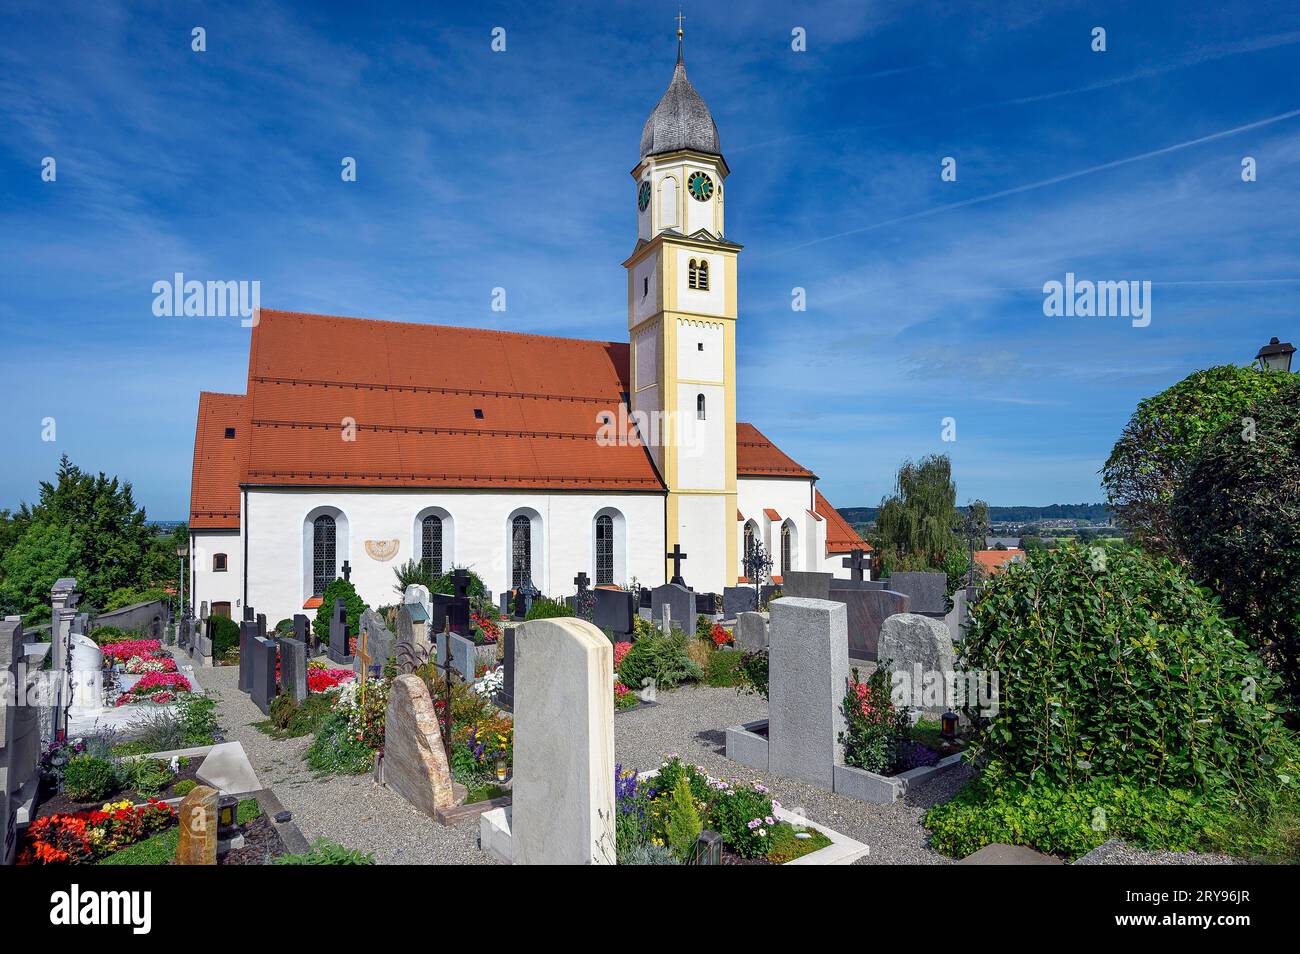 The Roman Catholic collegiate church of St. Philipp and St. Jakob, today's parish church is a listed building, Bad Groenenbach, Bavaria, Germany Stock Photo